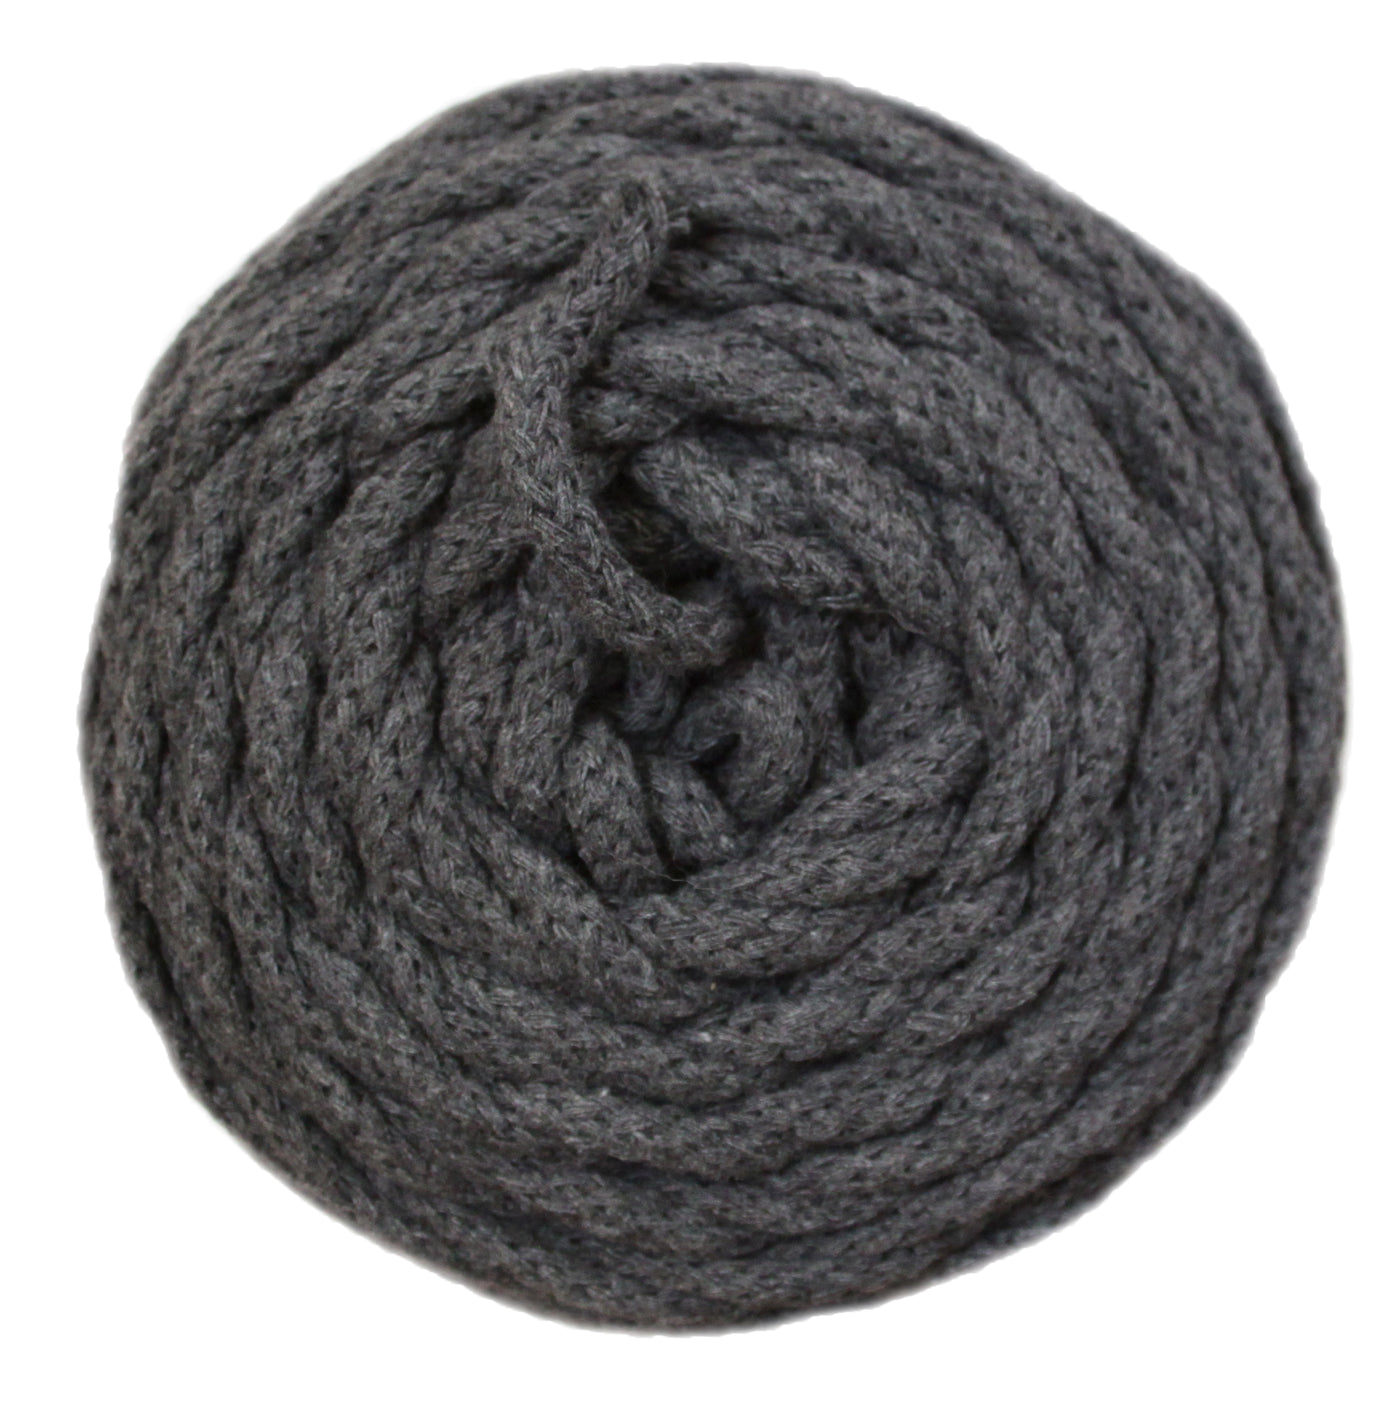 COTTON AIR 6 MM ZERO WASTE - CHARCOAL GRAY COLOR